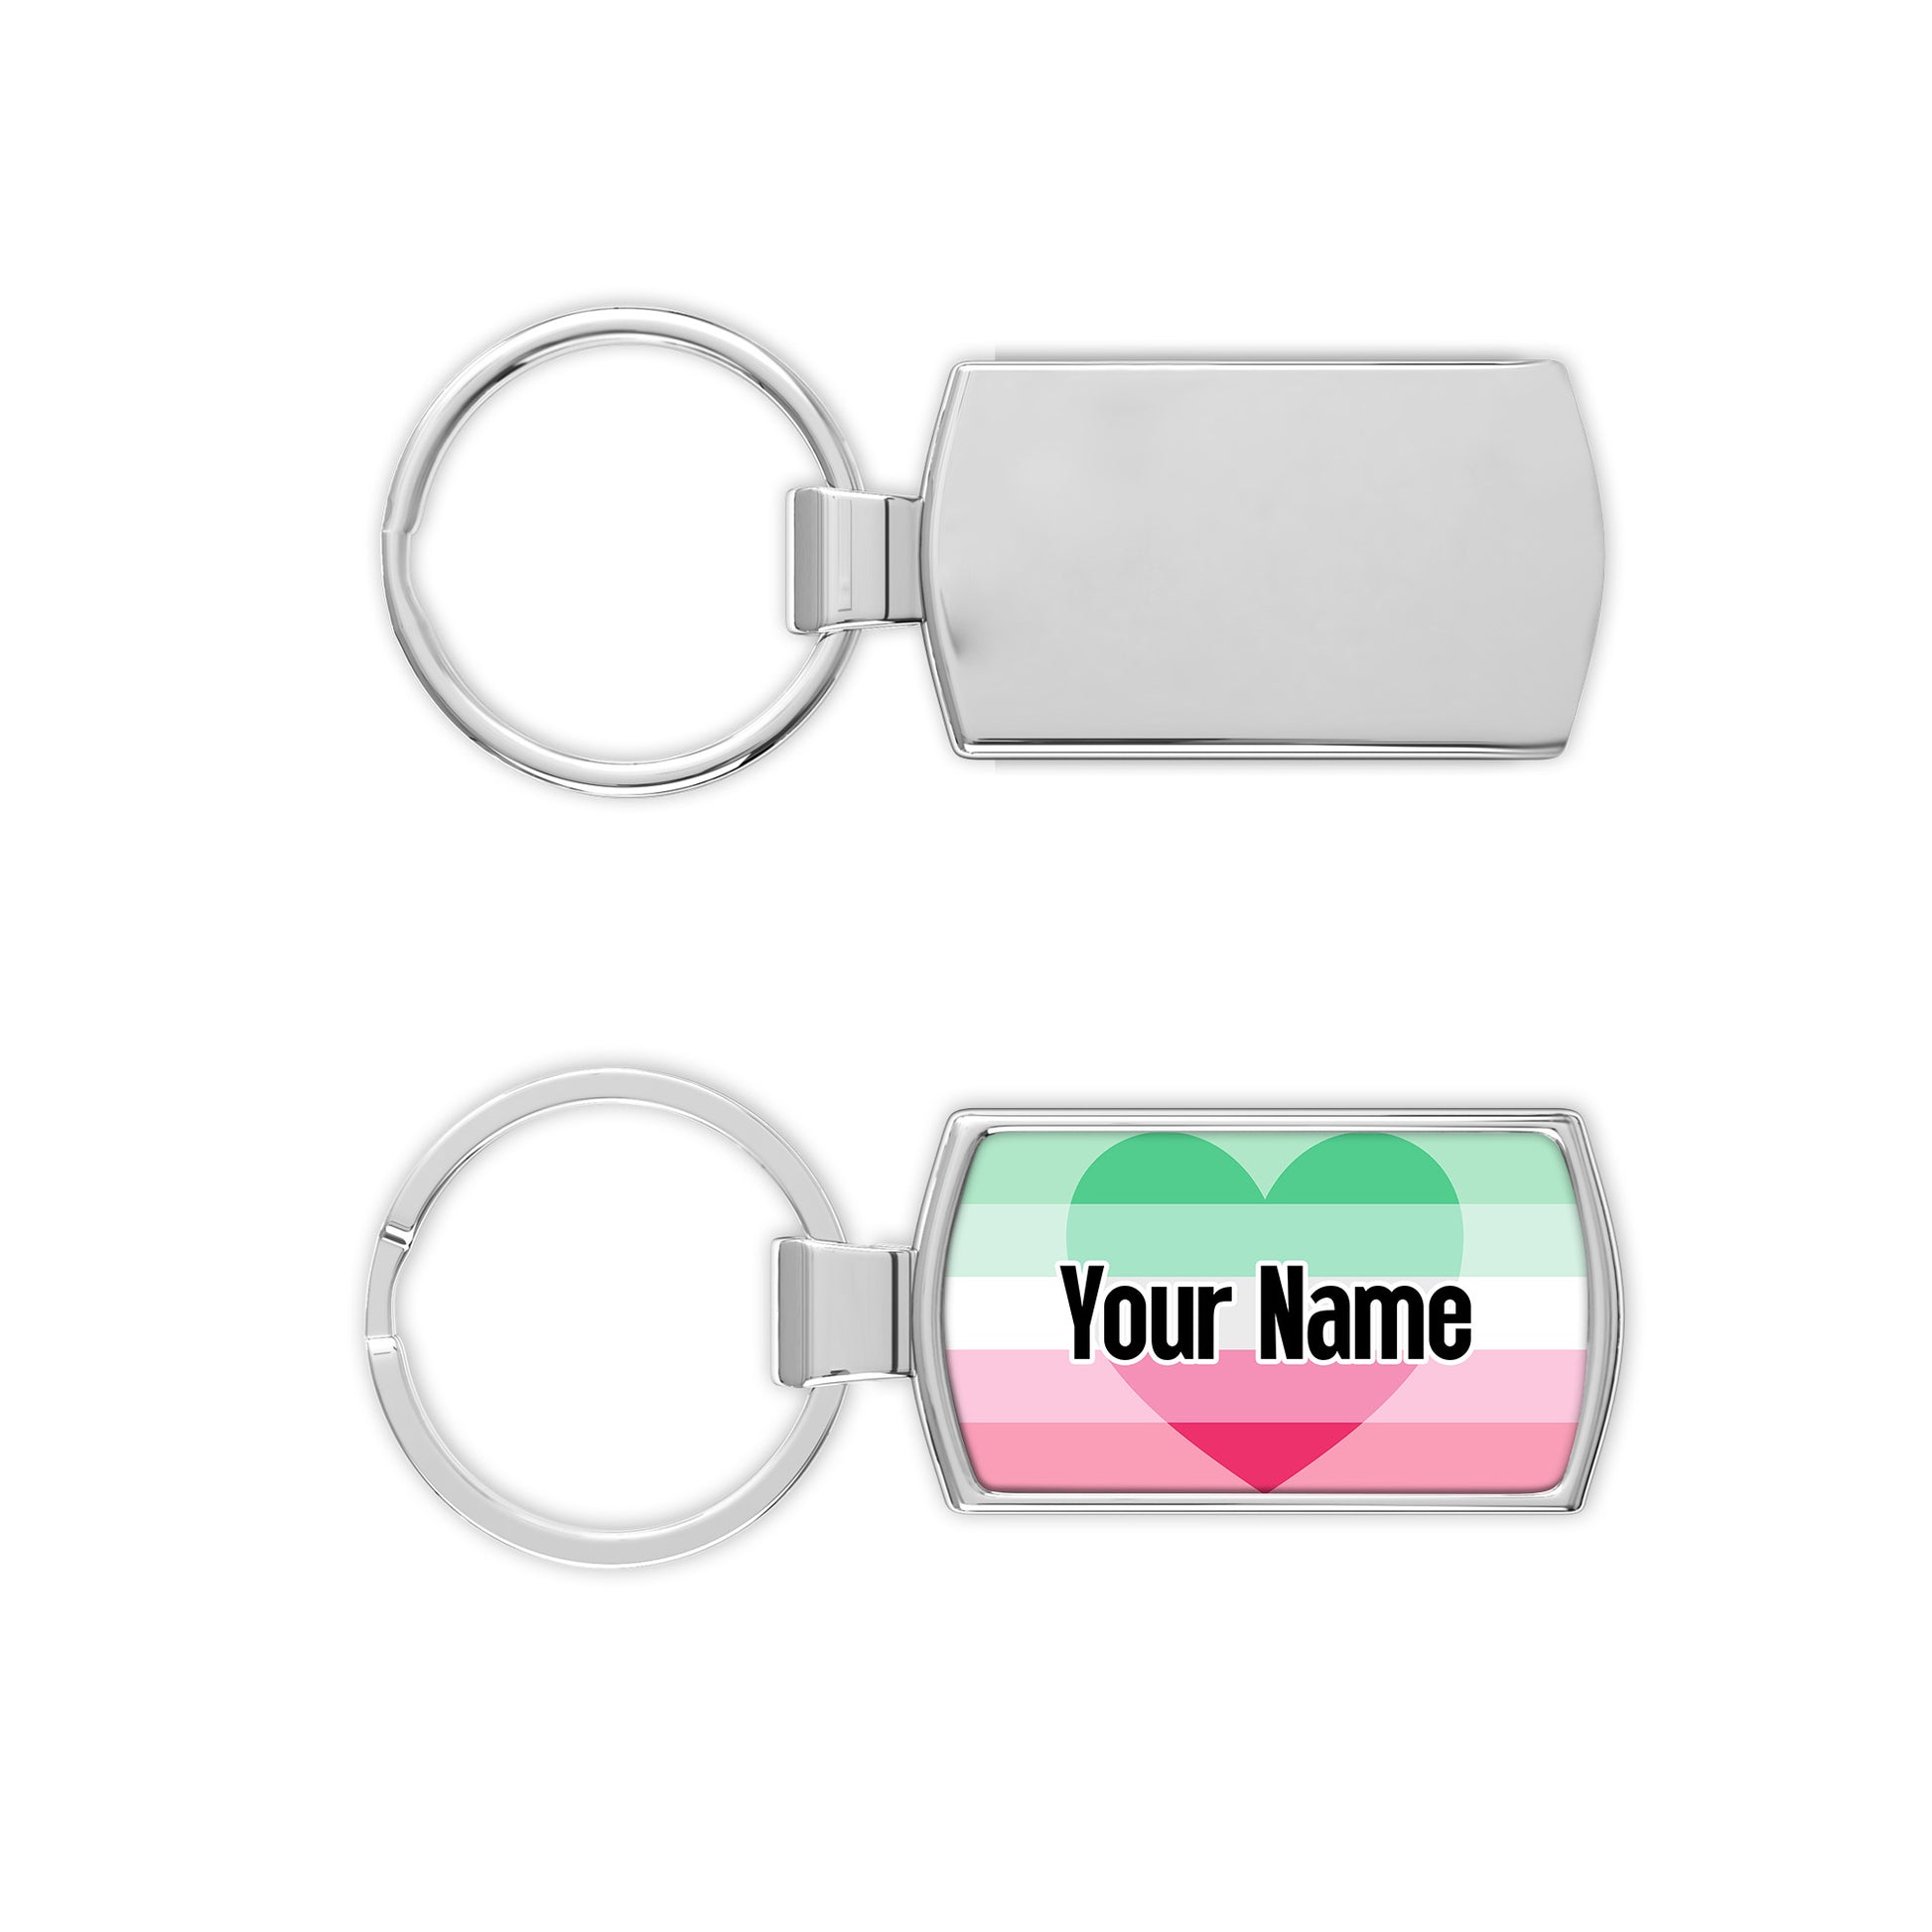 Abroromantic pride flag metal keyring personalised with your name